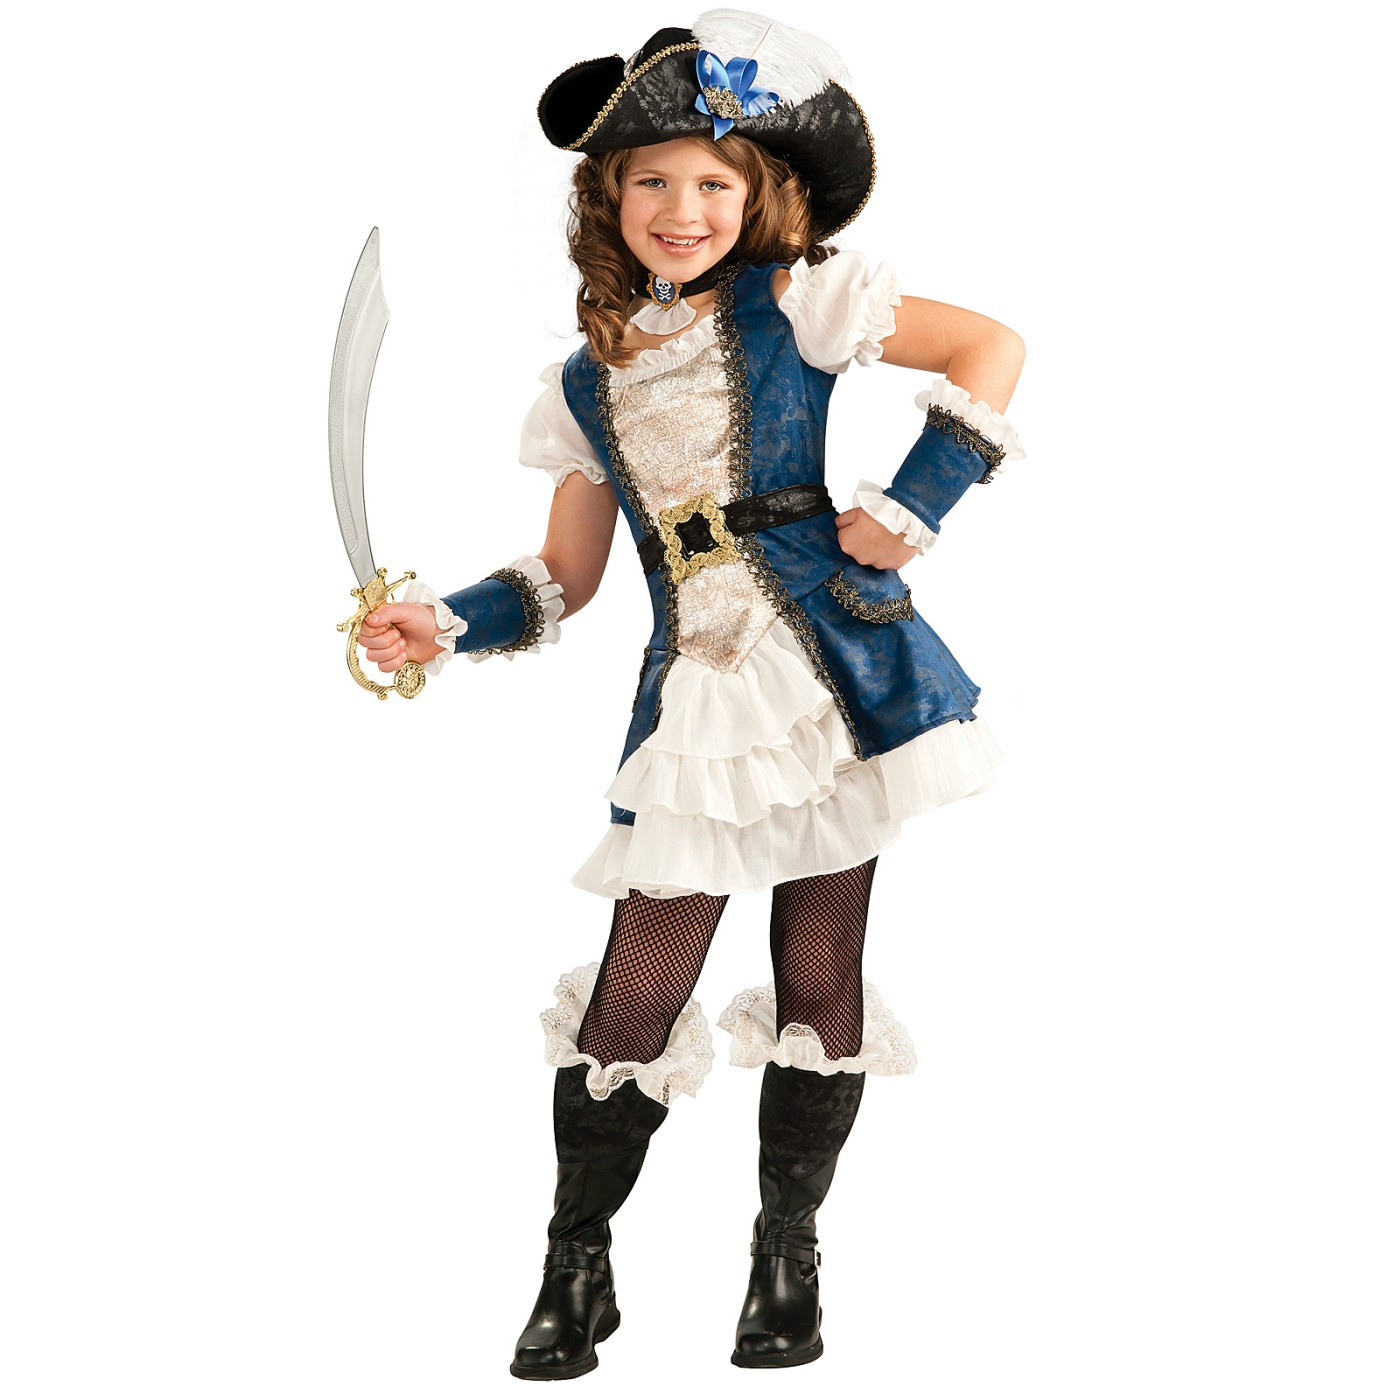 DIY Costume For Girls
 58 Cute Halloween Costumes For 10 Year Old Girls 10 Year